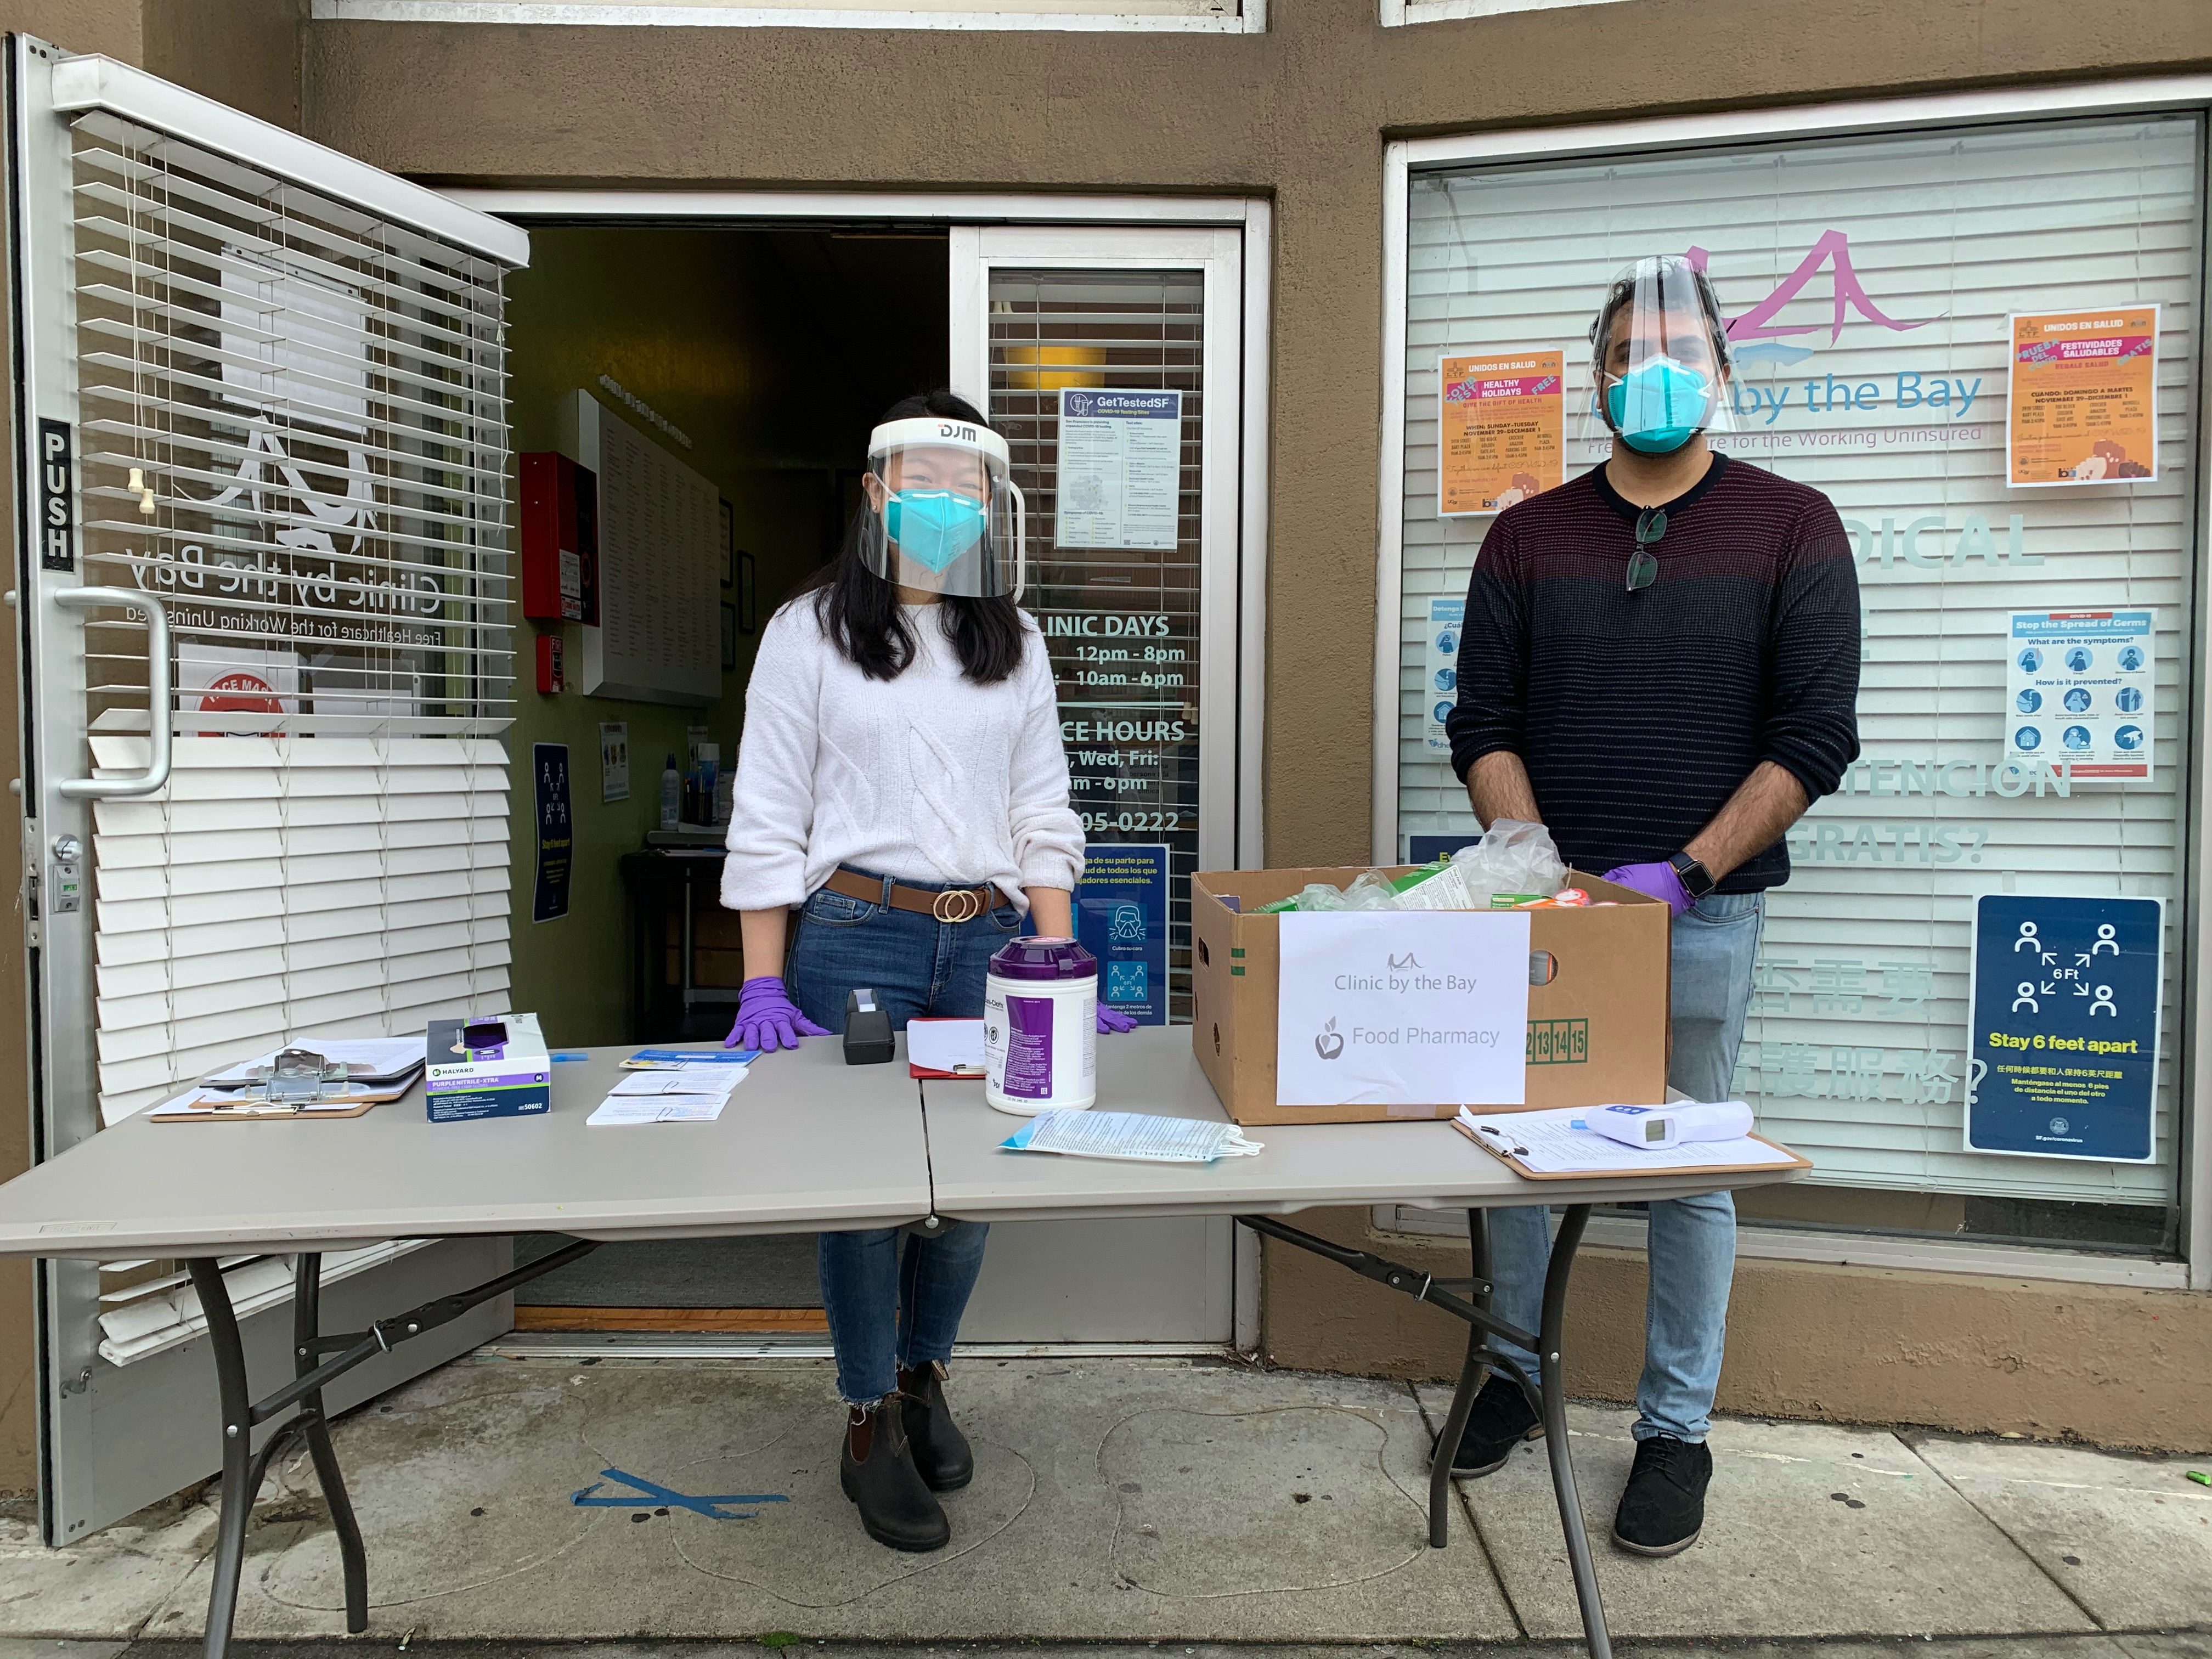 Cindy Won (left), serving at Clinic by the Bay's Food Pharmacy.